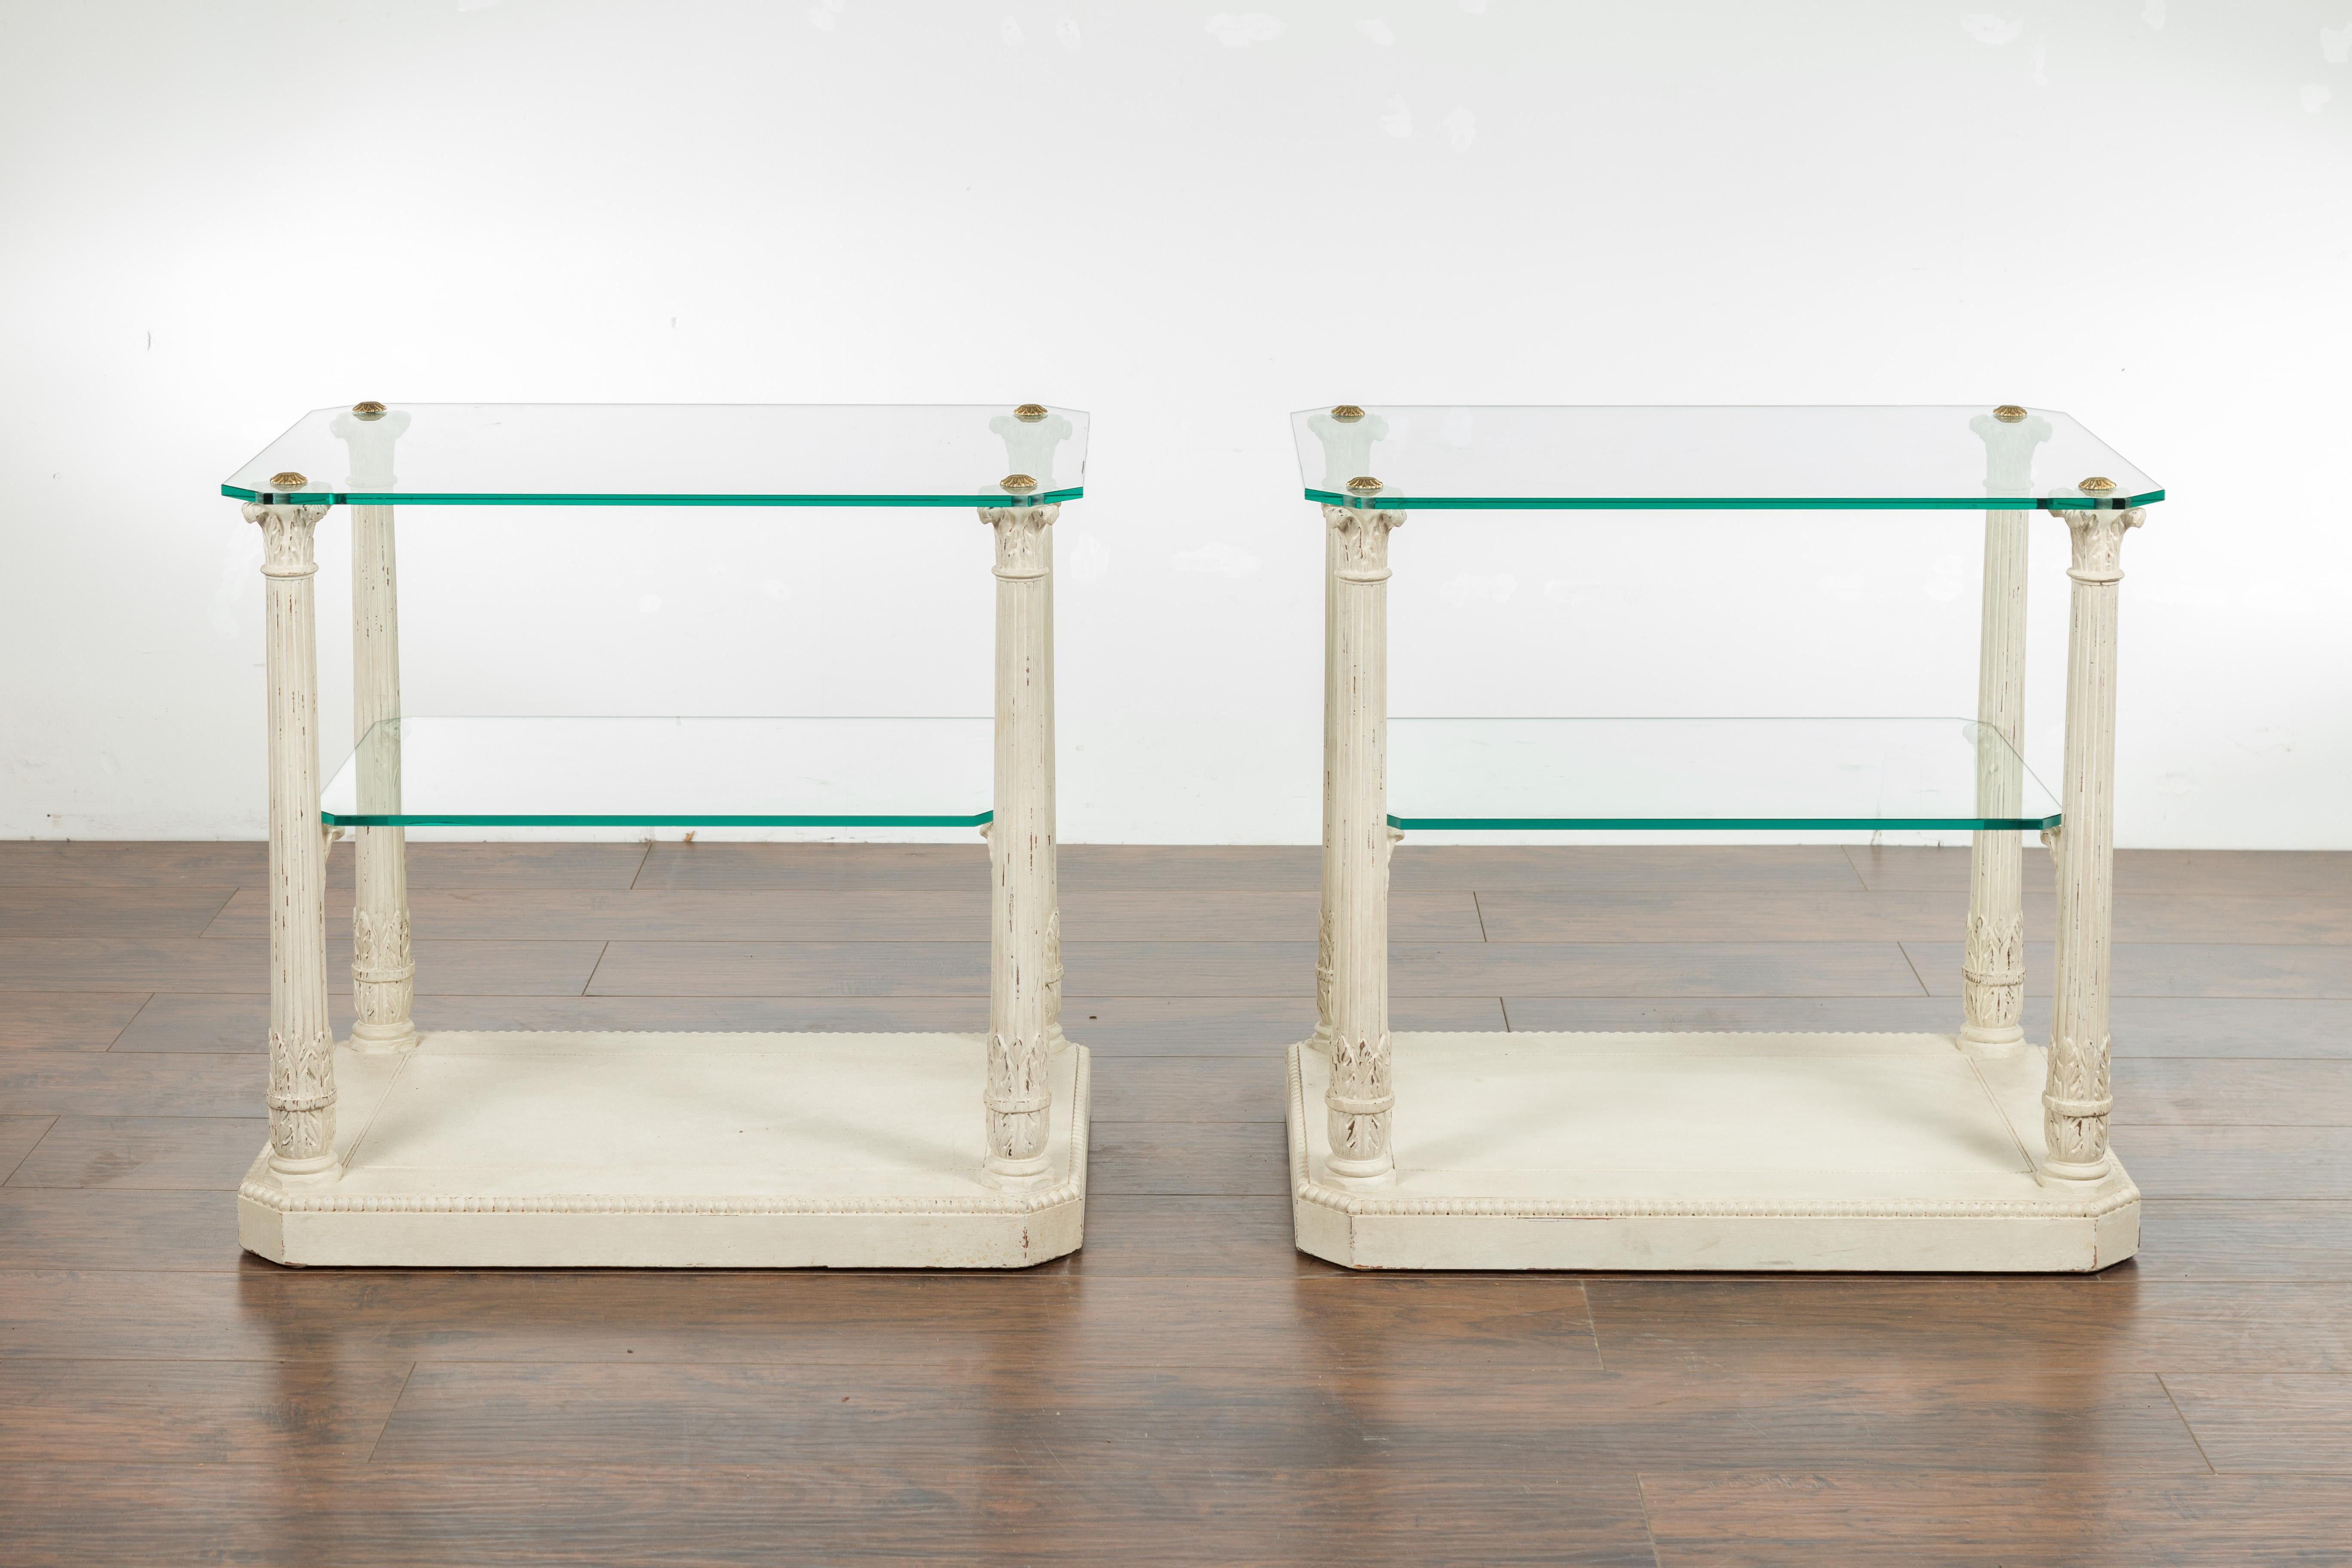 A pair of French Maison Jansen column tables from the mid-20th century, with Corinthian capitals and glass top and shelves. Created in France during the midcentury period, each of this pair of Maison Jansen tables features a rectangular glass top